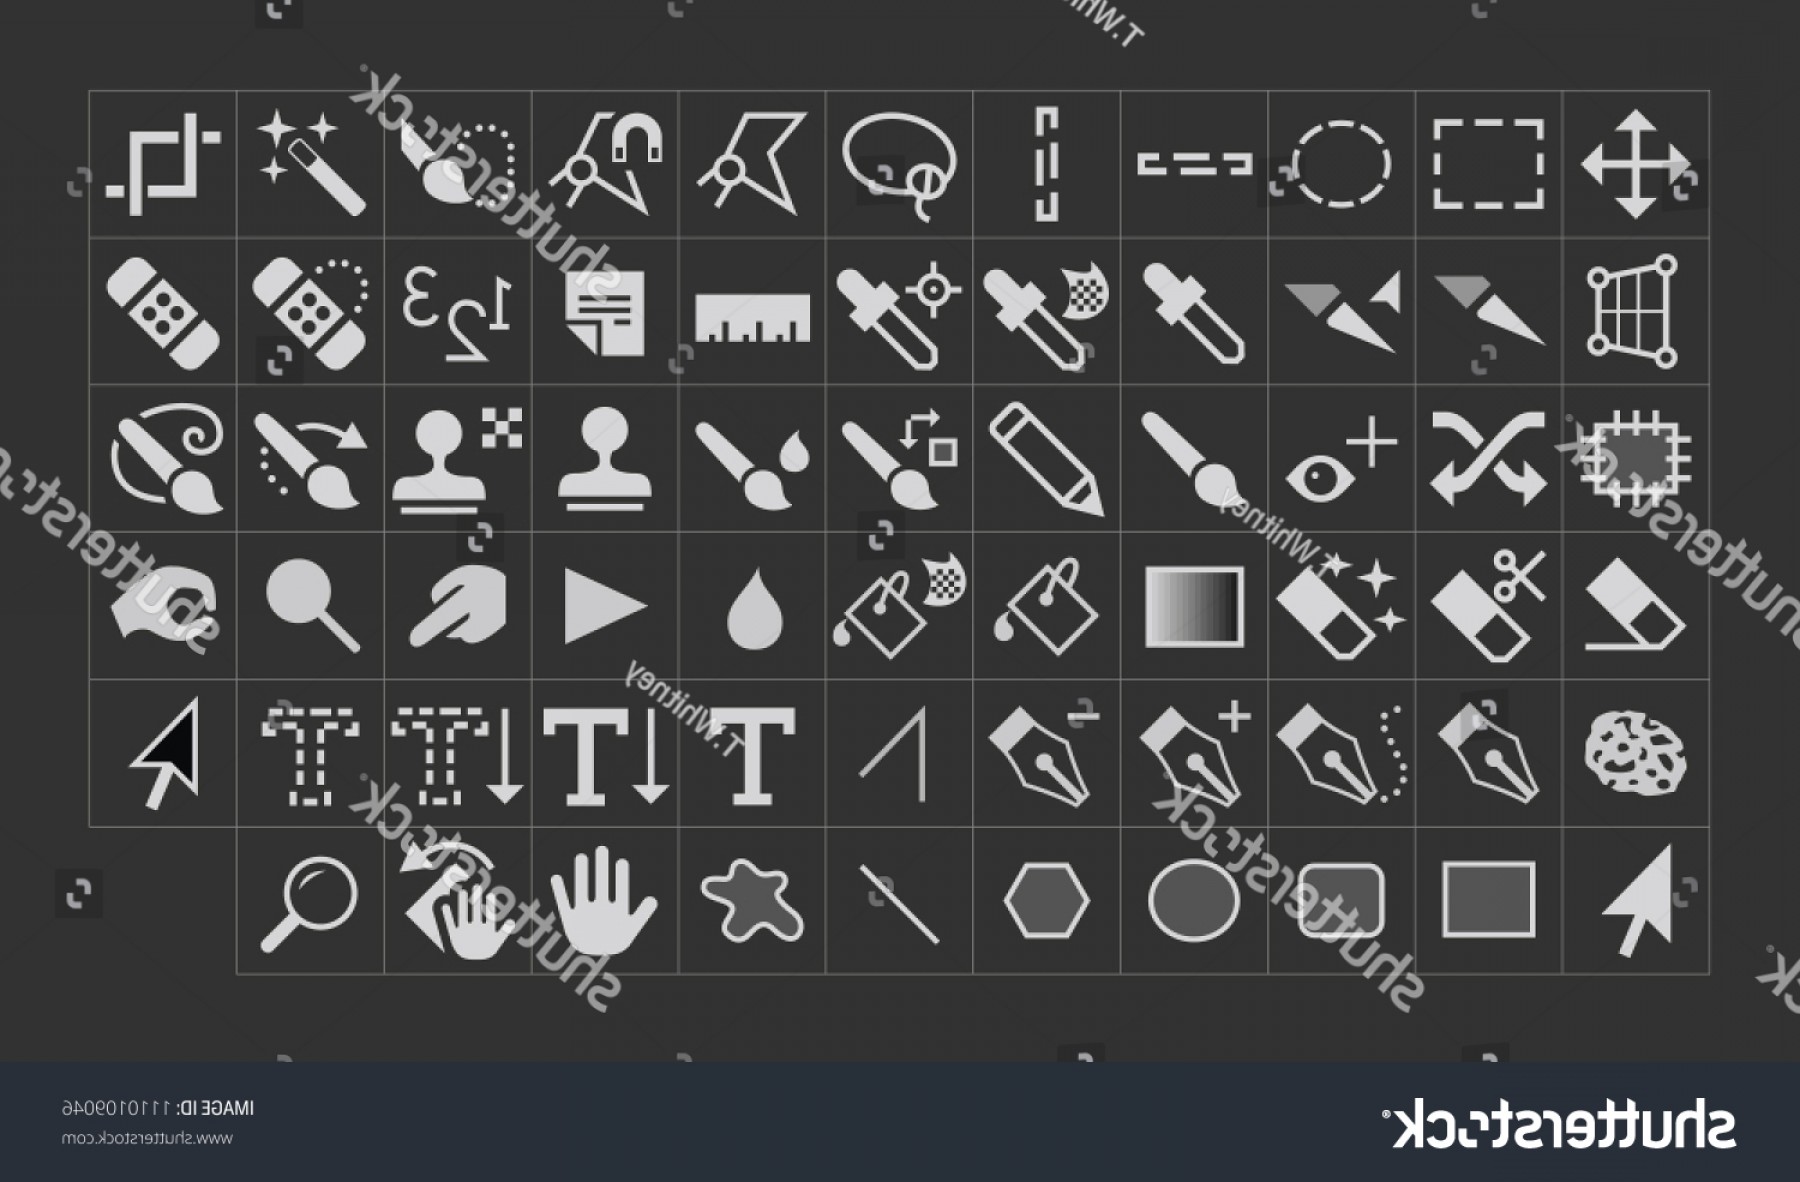 Photoshop Icon Vector at Vectorified.com | Collection of Photoshop Icon ...